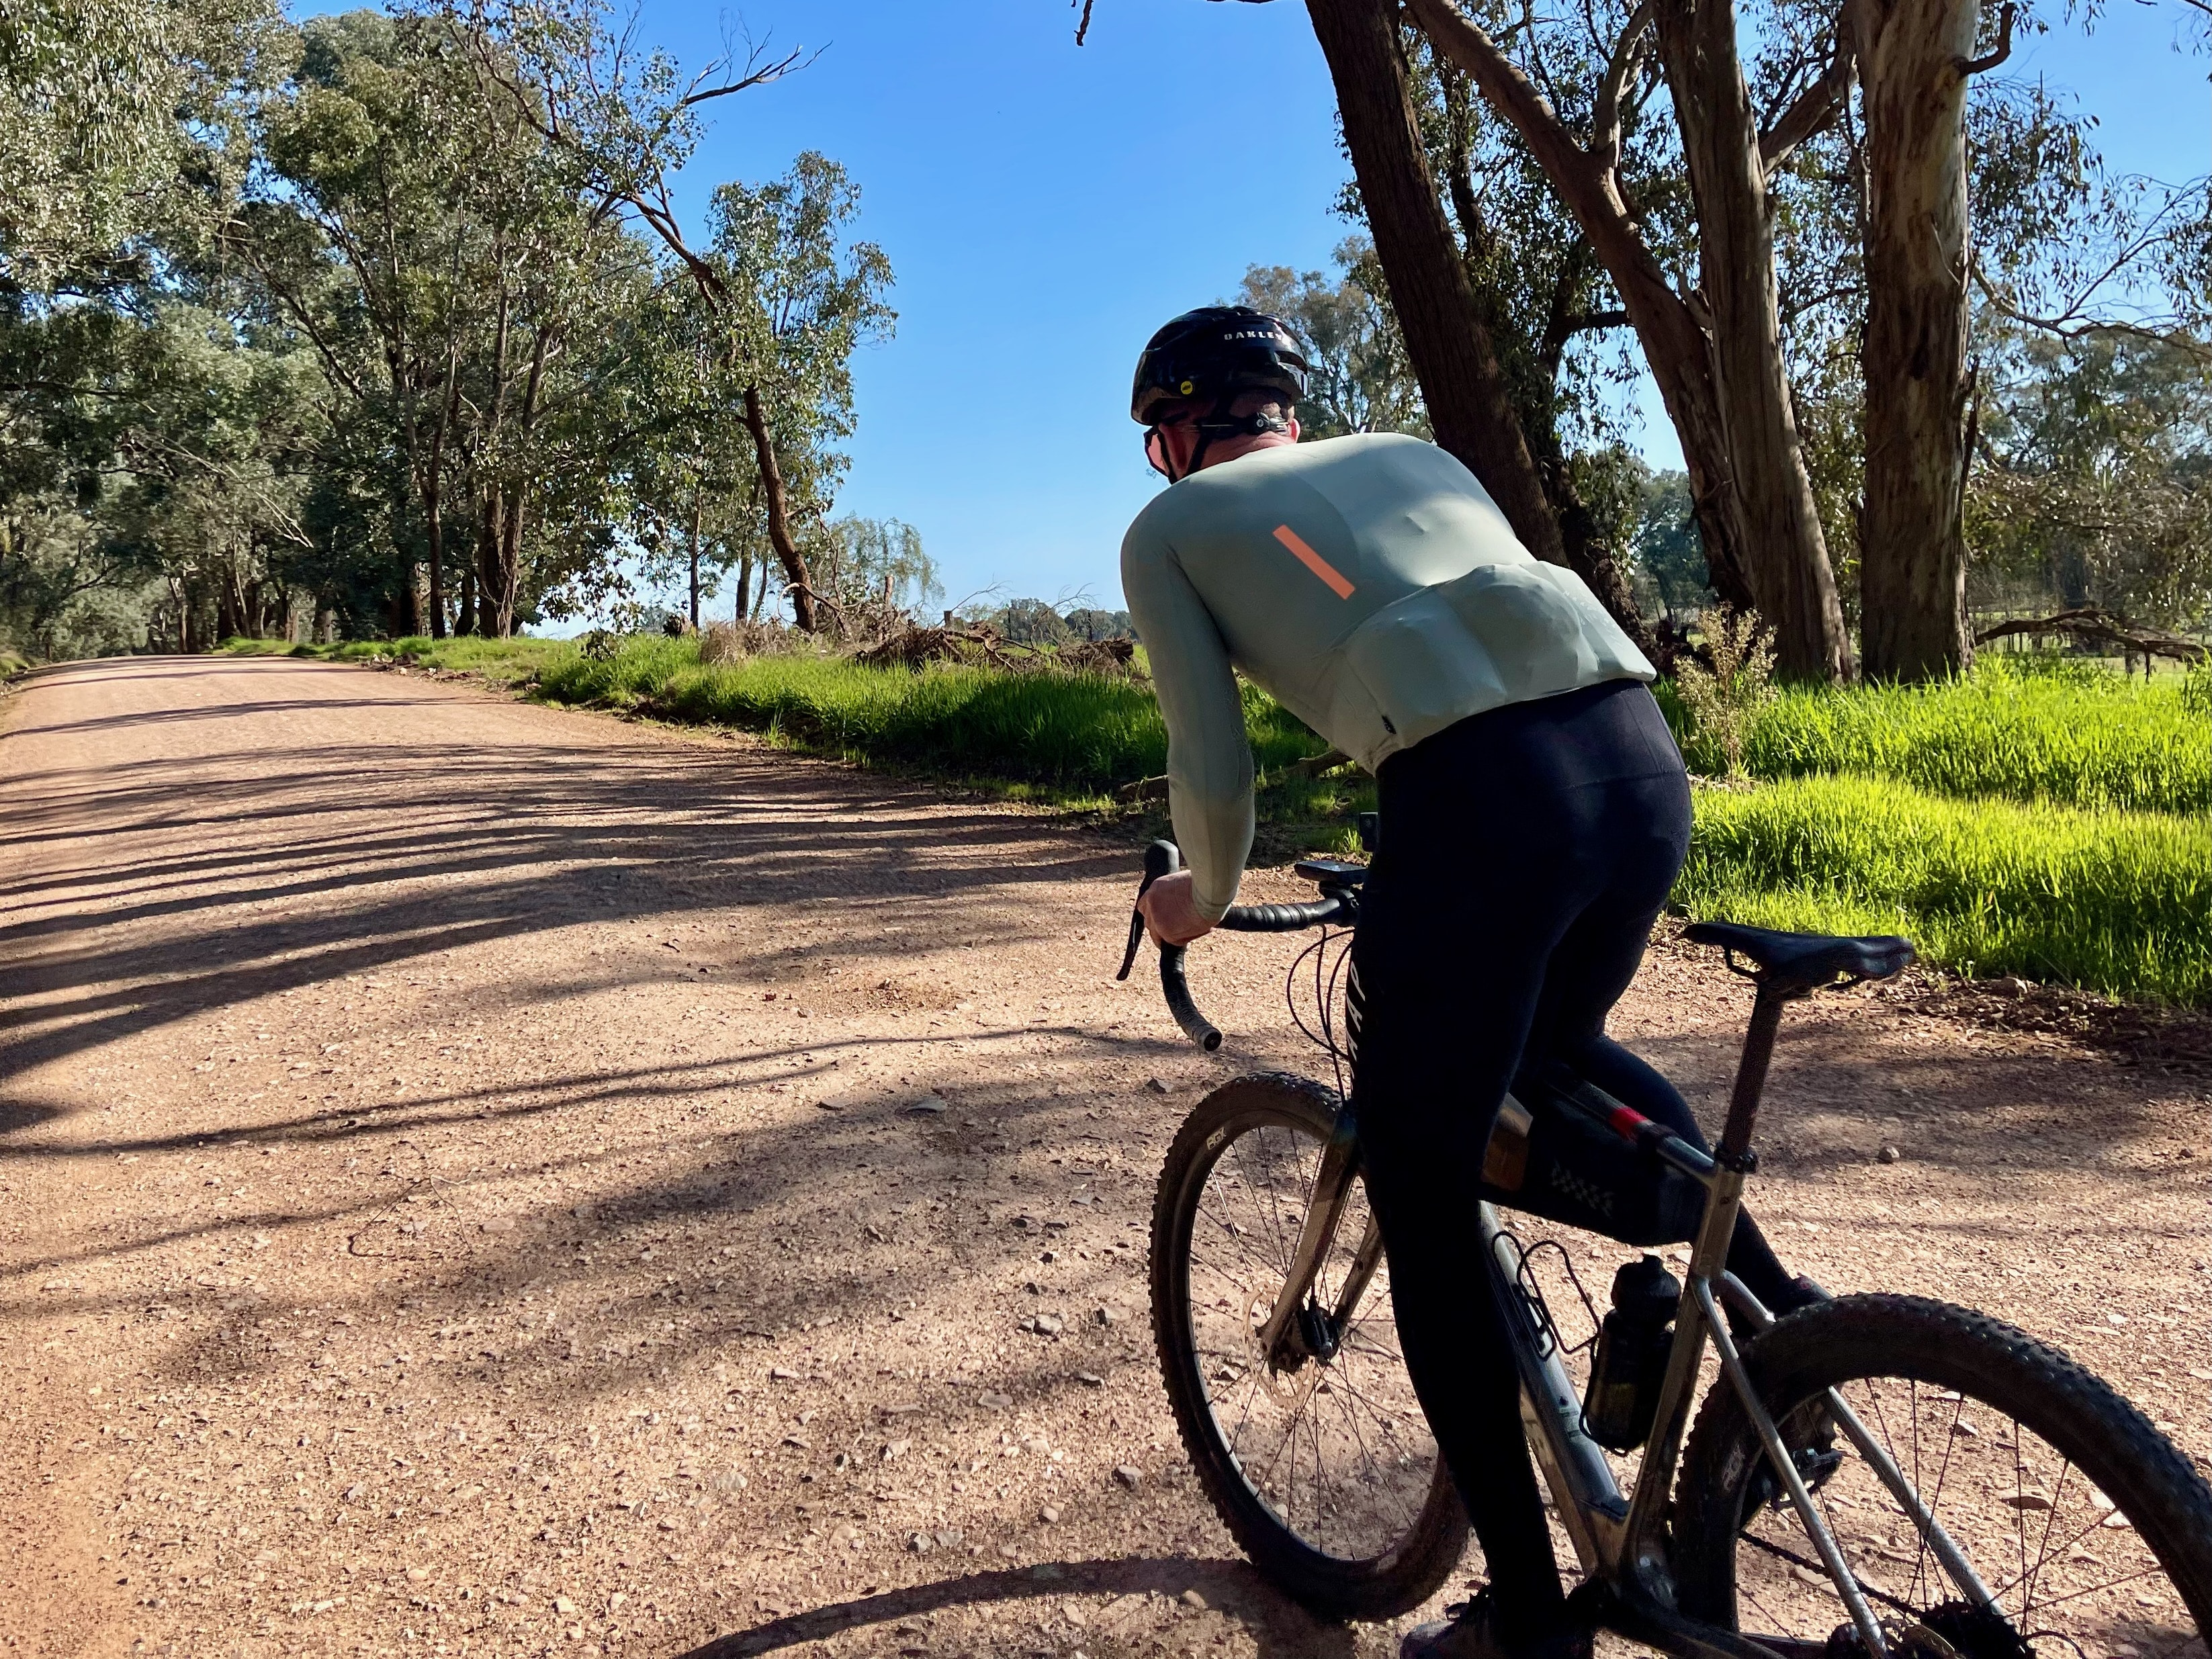 Cyclist climbing up a smooth gravel road surrounded by native bushland